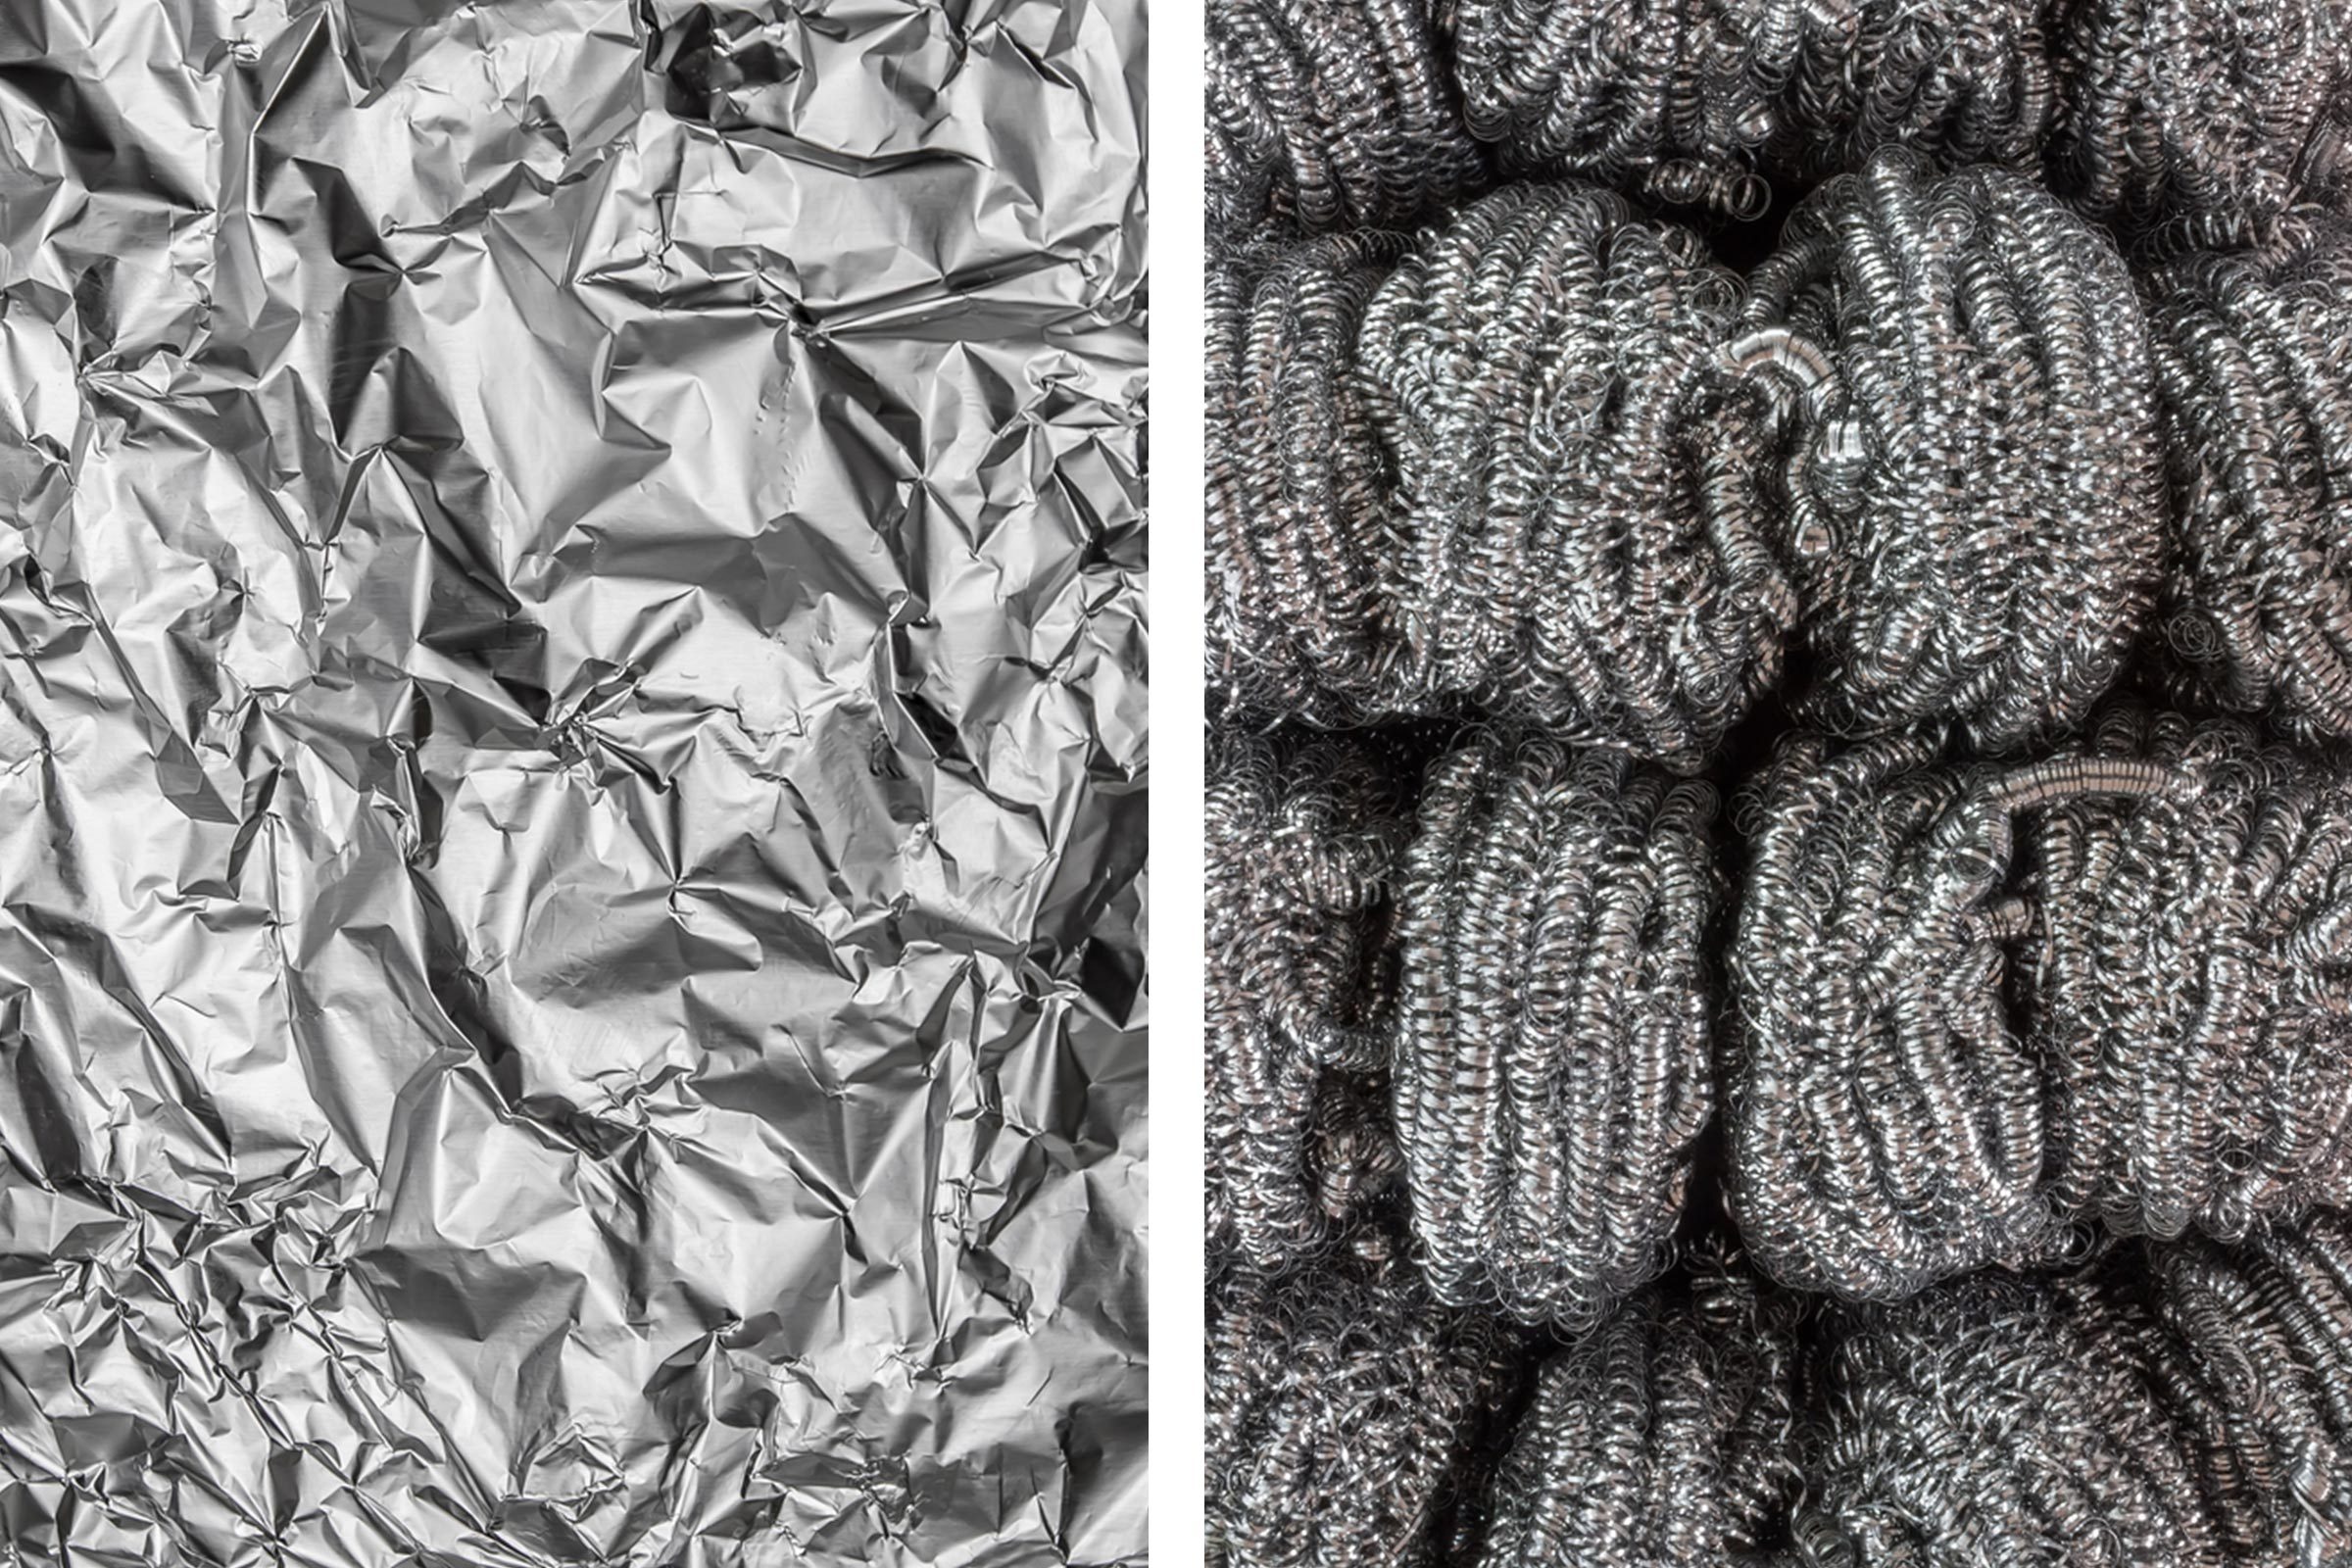 10 genius ways to use aluminum foil for more than just baking - CNET